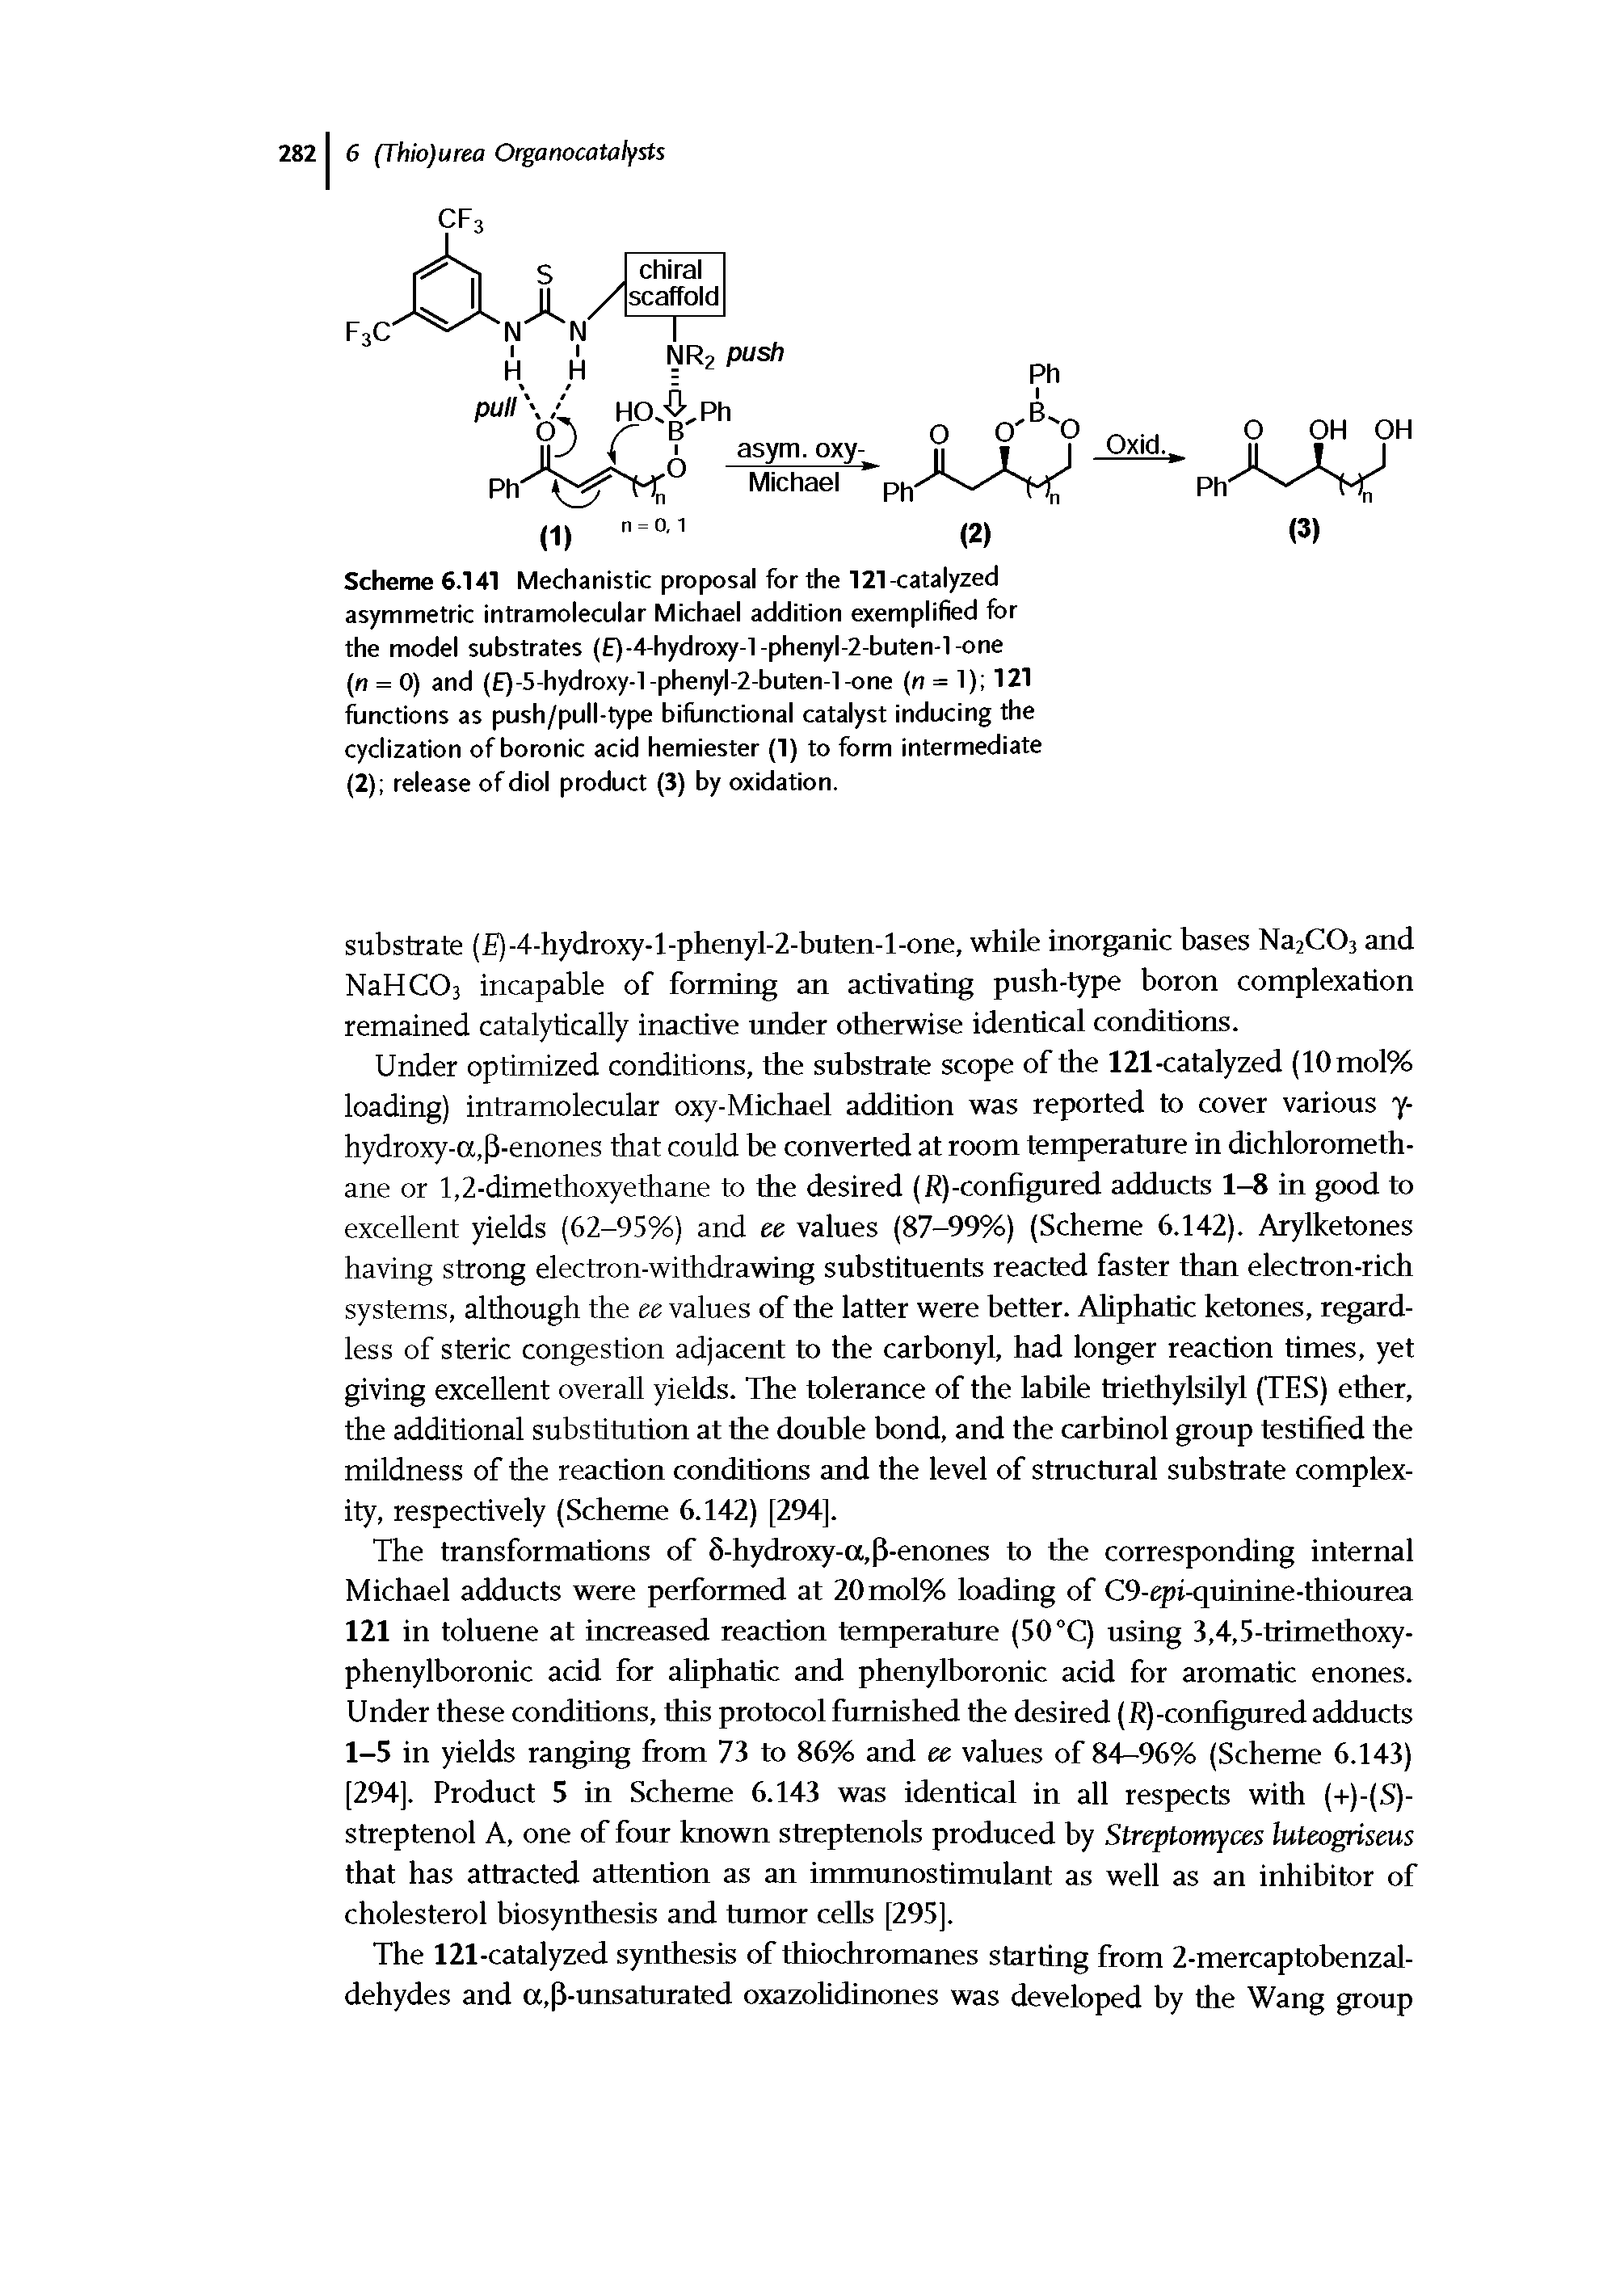 Scheme 6.141 Mechanistic proposal for the 121-catalyzed asymmetric intramolecular Michael addition exemplified for the model substrates ( )-4-hydroxy-l-phenyl-2-buten-l-one (n = 0) and ( )-5-hydroxy-l-phenyl-2-buten-l-one (n = 1) 121 functions as push/pull-type bifunctional catalyst inducing the cyclization of boronic acid hemiester (1) to form intermediate (2) release ofdiol product (3) by oxidation.